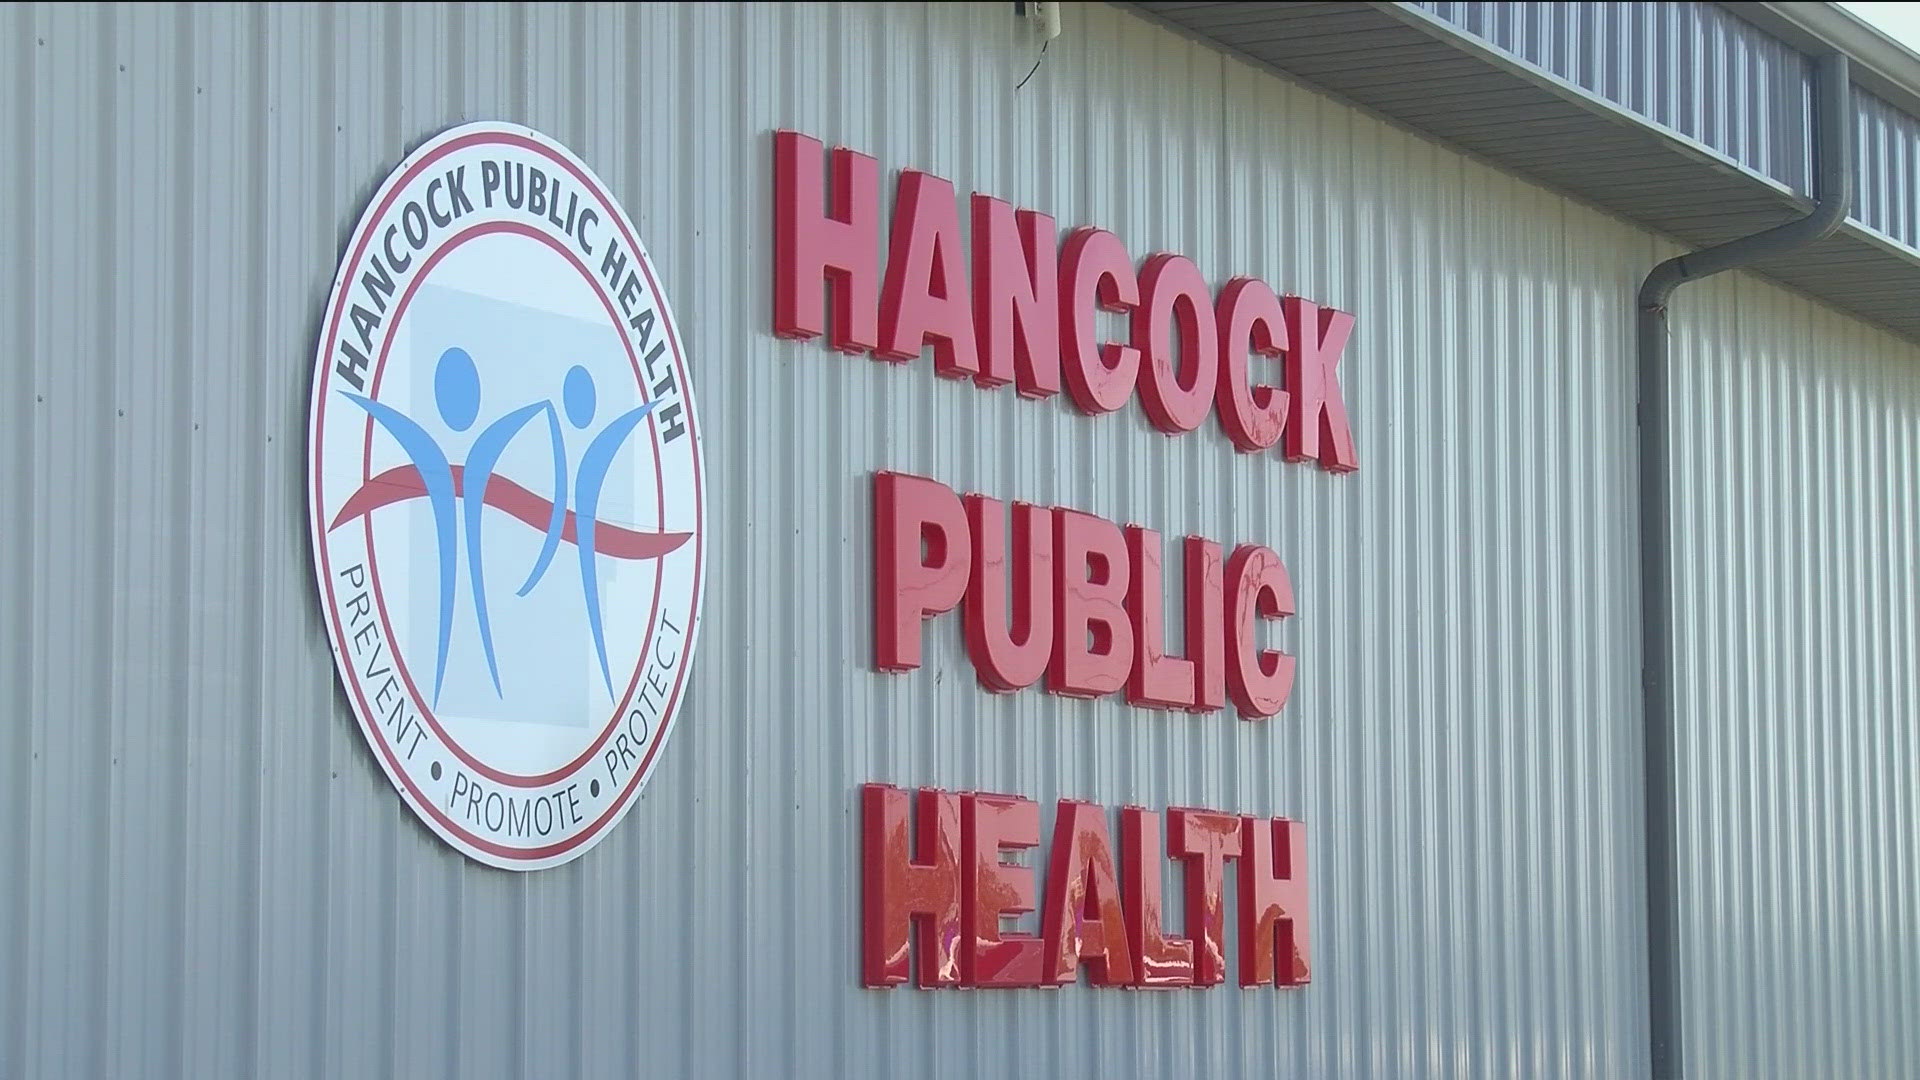 Heather Paul says she was able to get her health back on track with the mobile clinic and its staff in Hancock County.